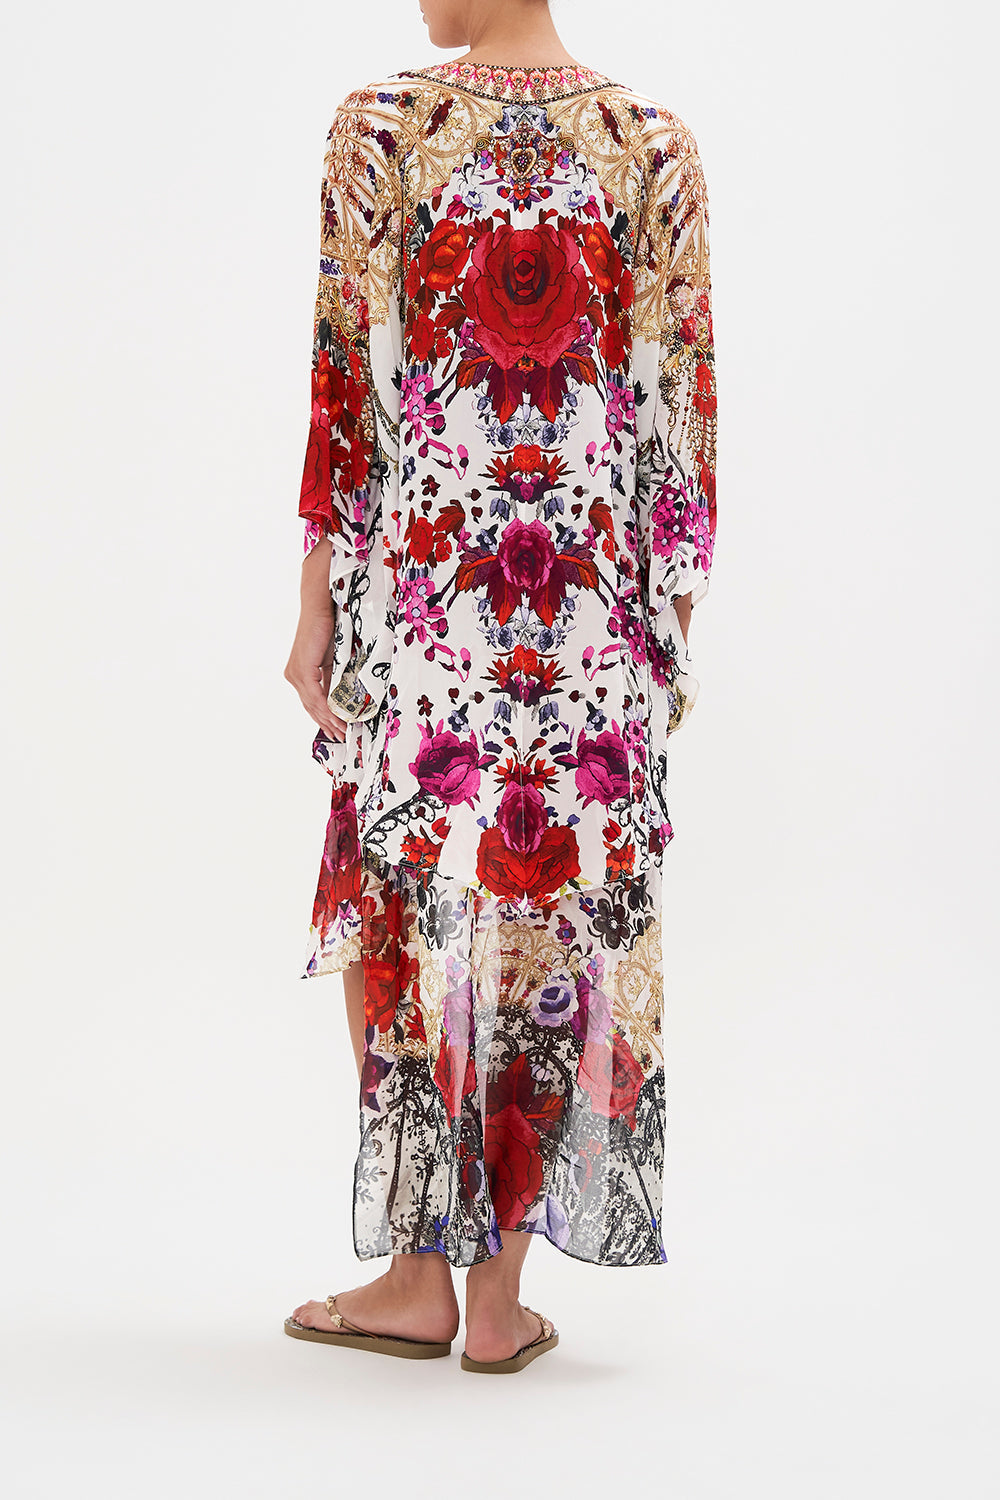 KIMONO WITH LONG UNDERLAYER REIGN OF ROSES